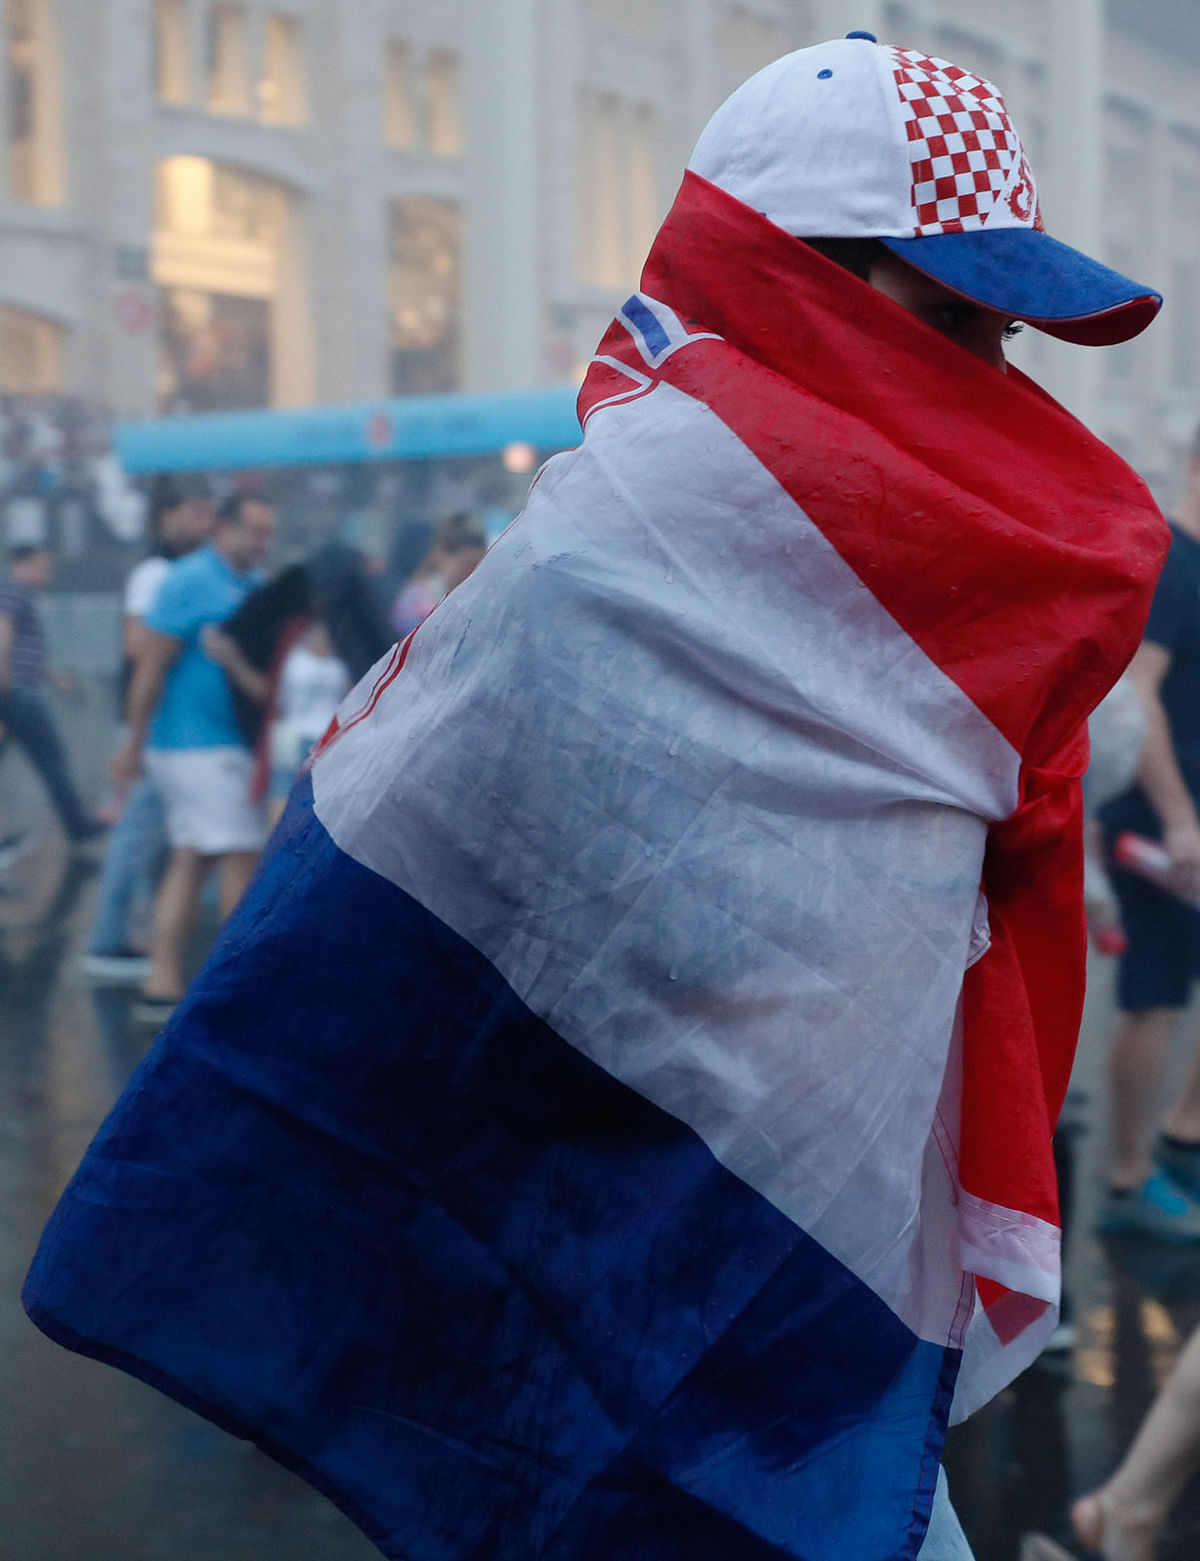 A supporter of team Croatia leaves the stadium after the game. Photo: Reuters